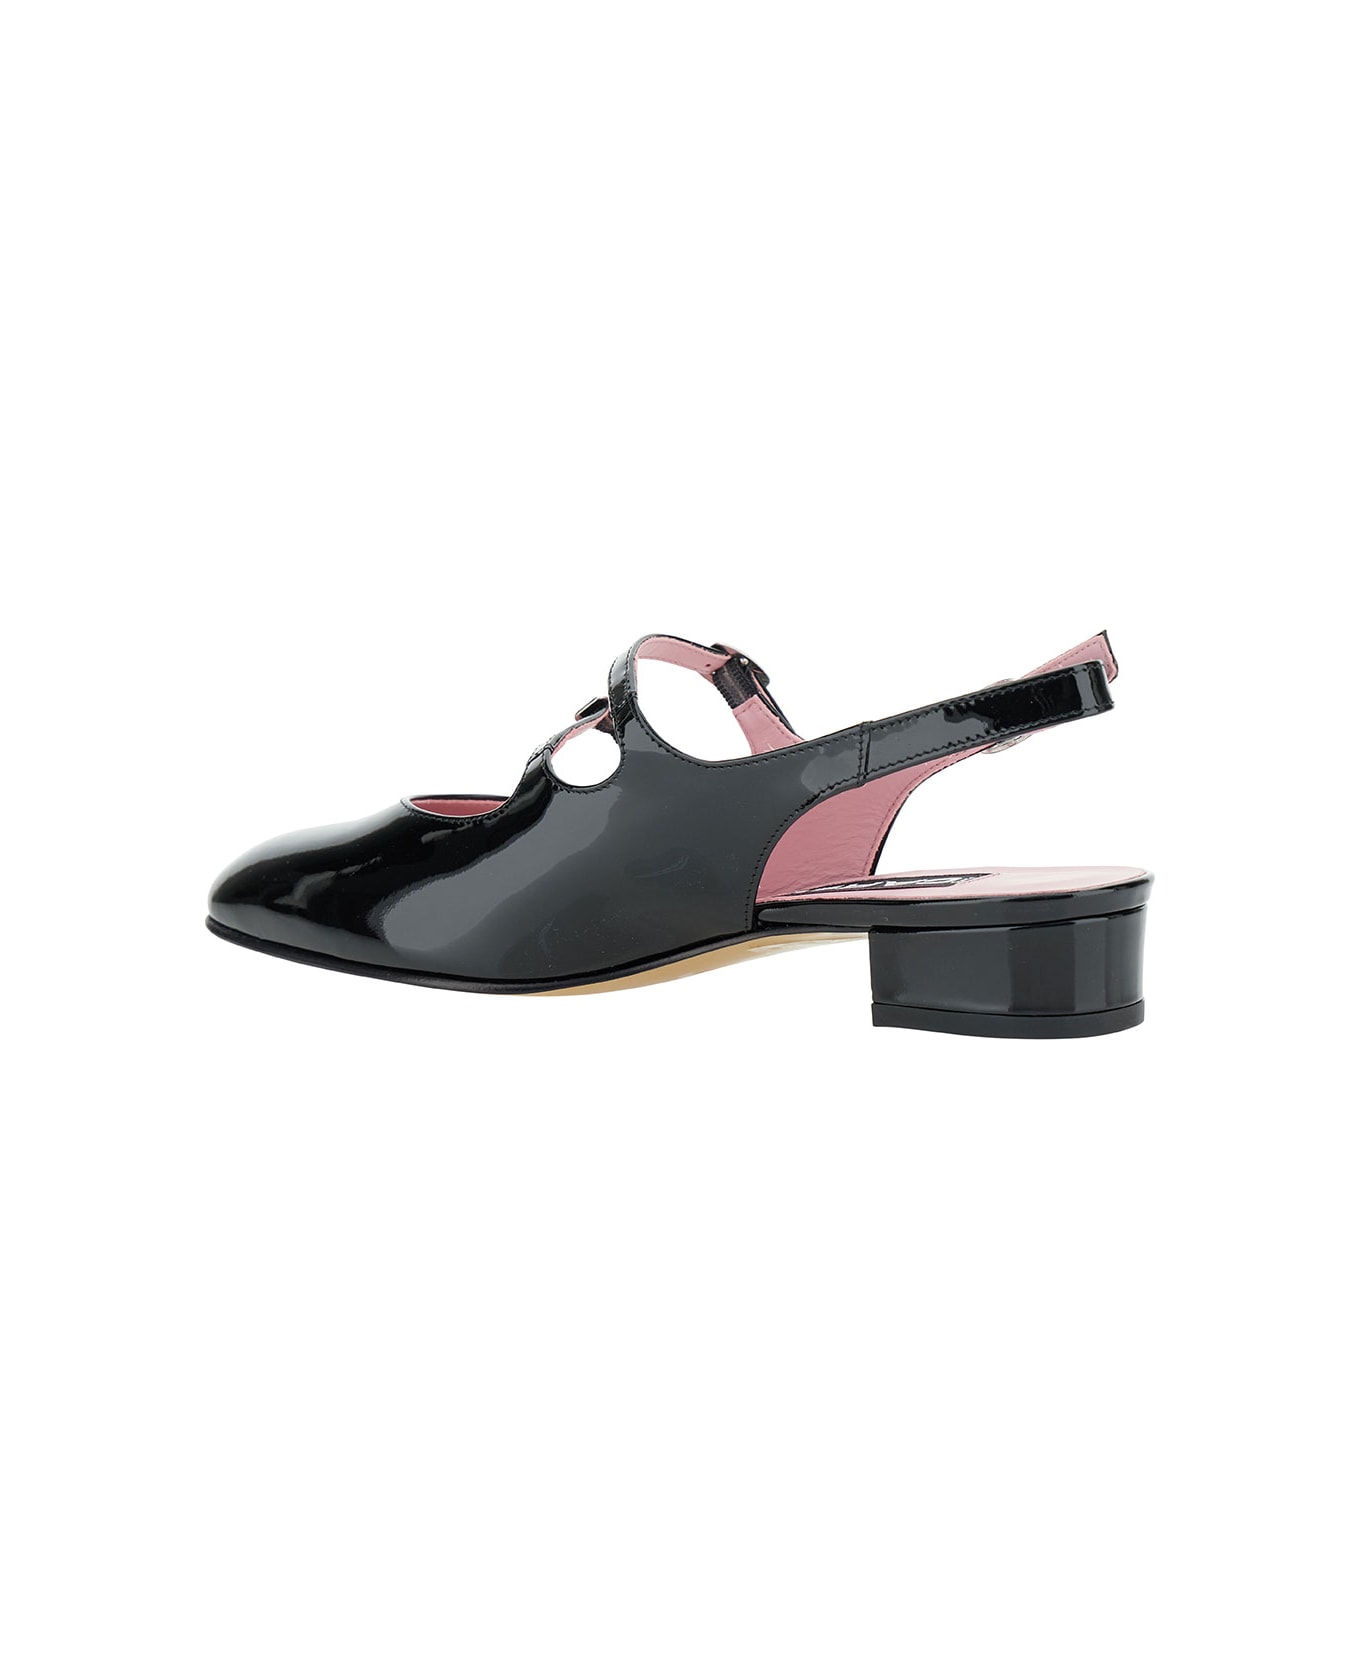 Carel Black Slingback Mary Janes With Block Heel In Patent Leather Woman - Black